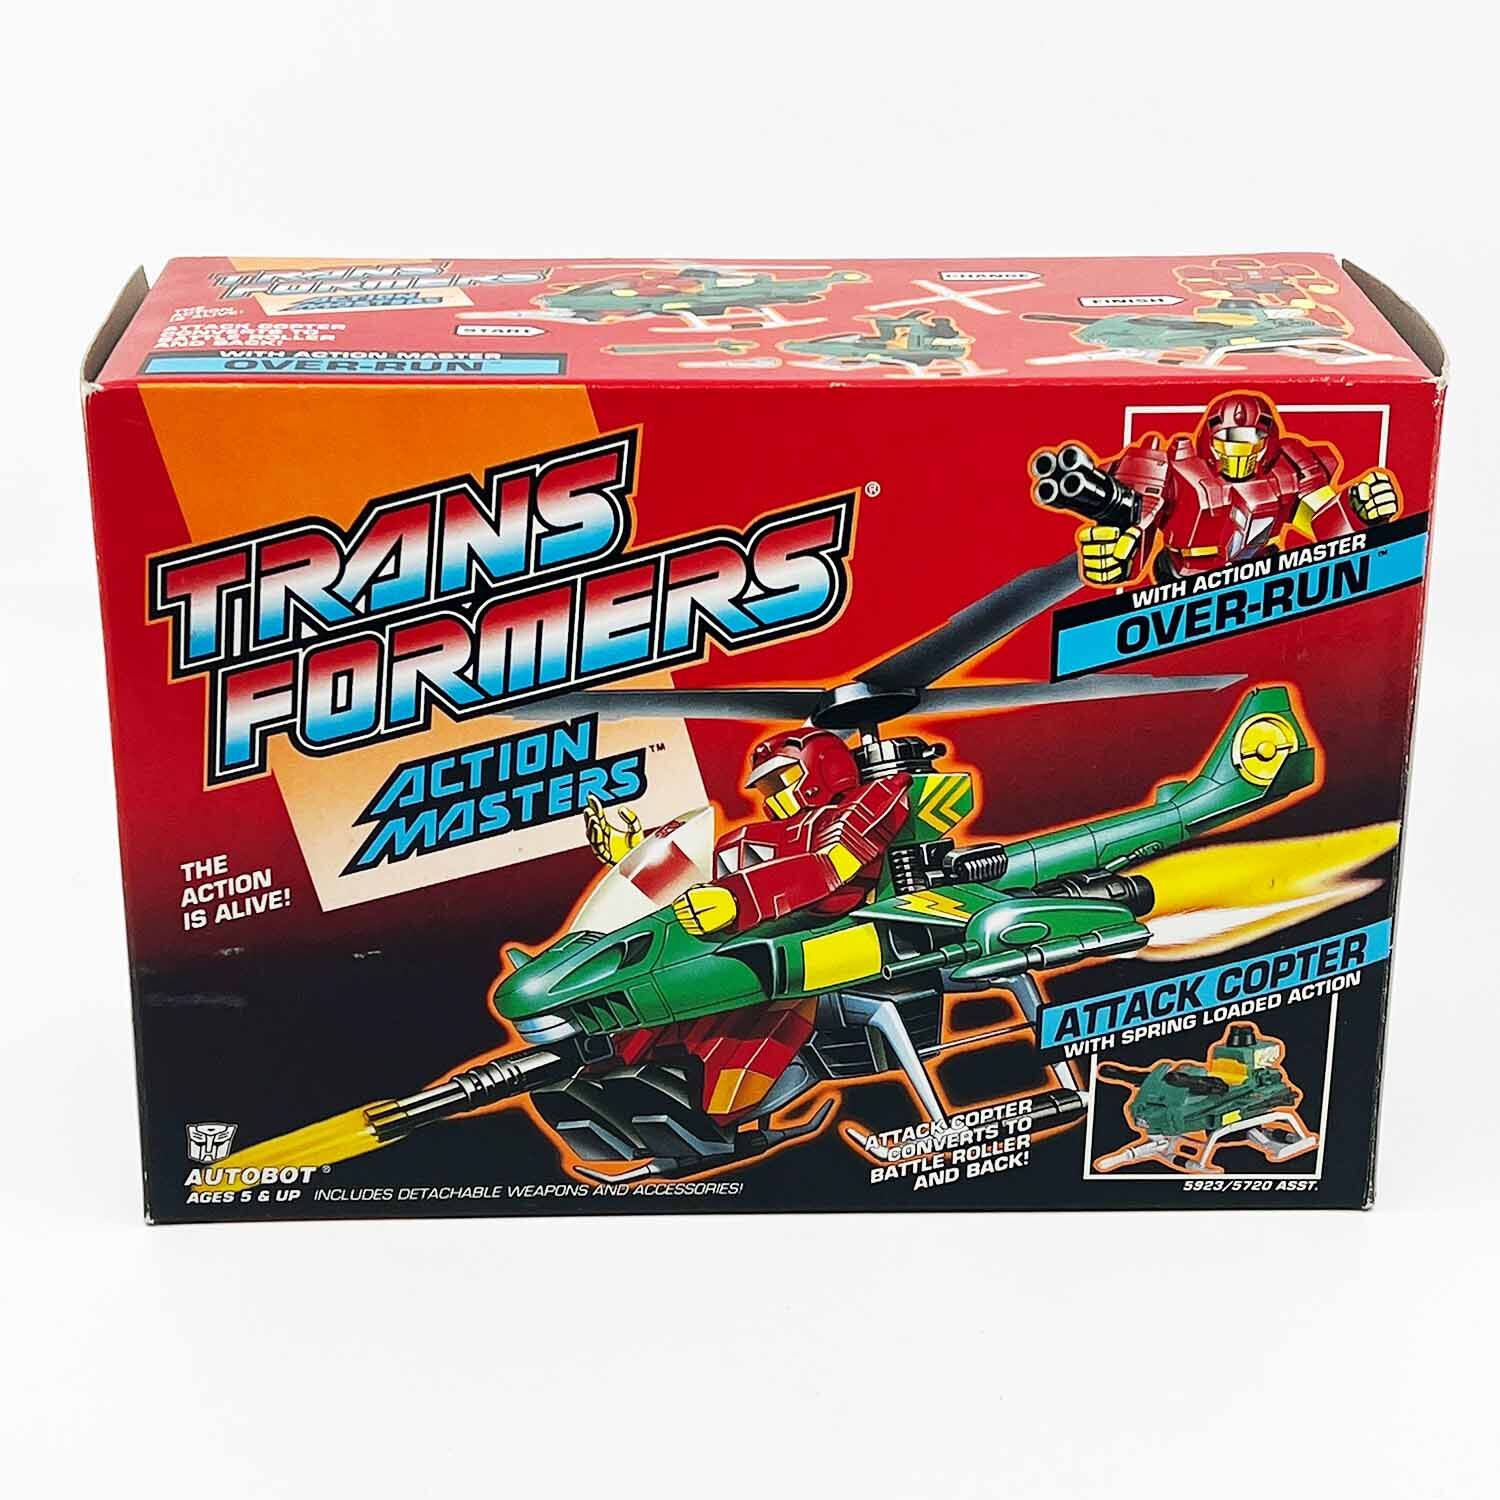 Over-Run Action Masters Autobot Transformers 1989 with Box